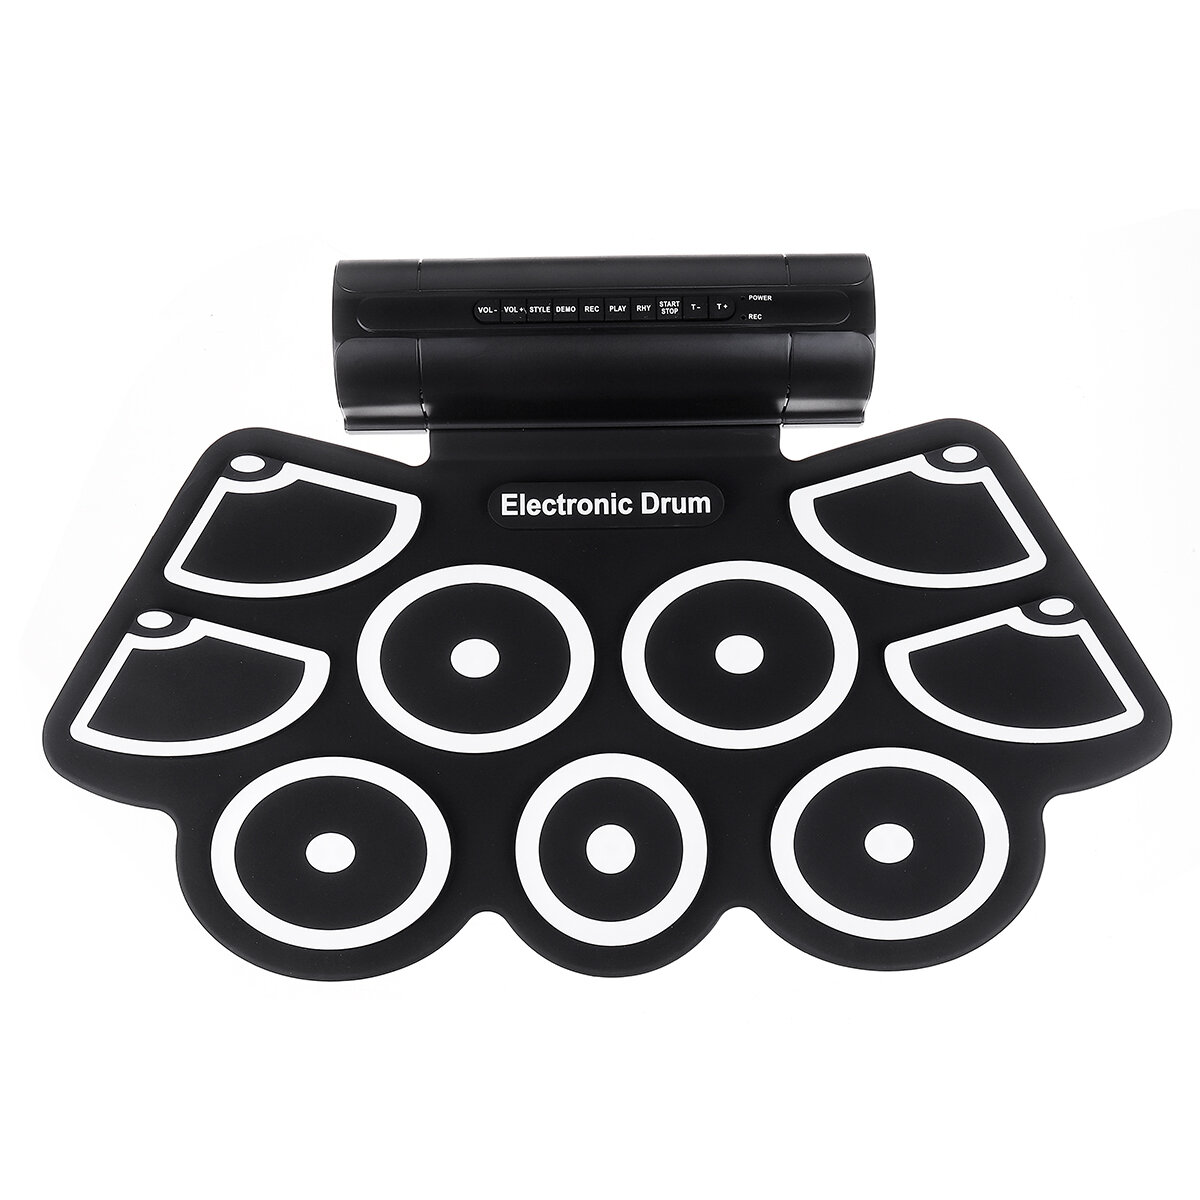 KONIX MD760 Portable USB 9 Pads Roll Up Electronic Drum with Built-in Battery Drum Sticks